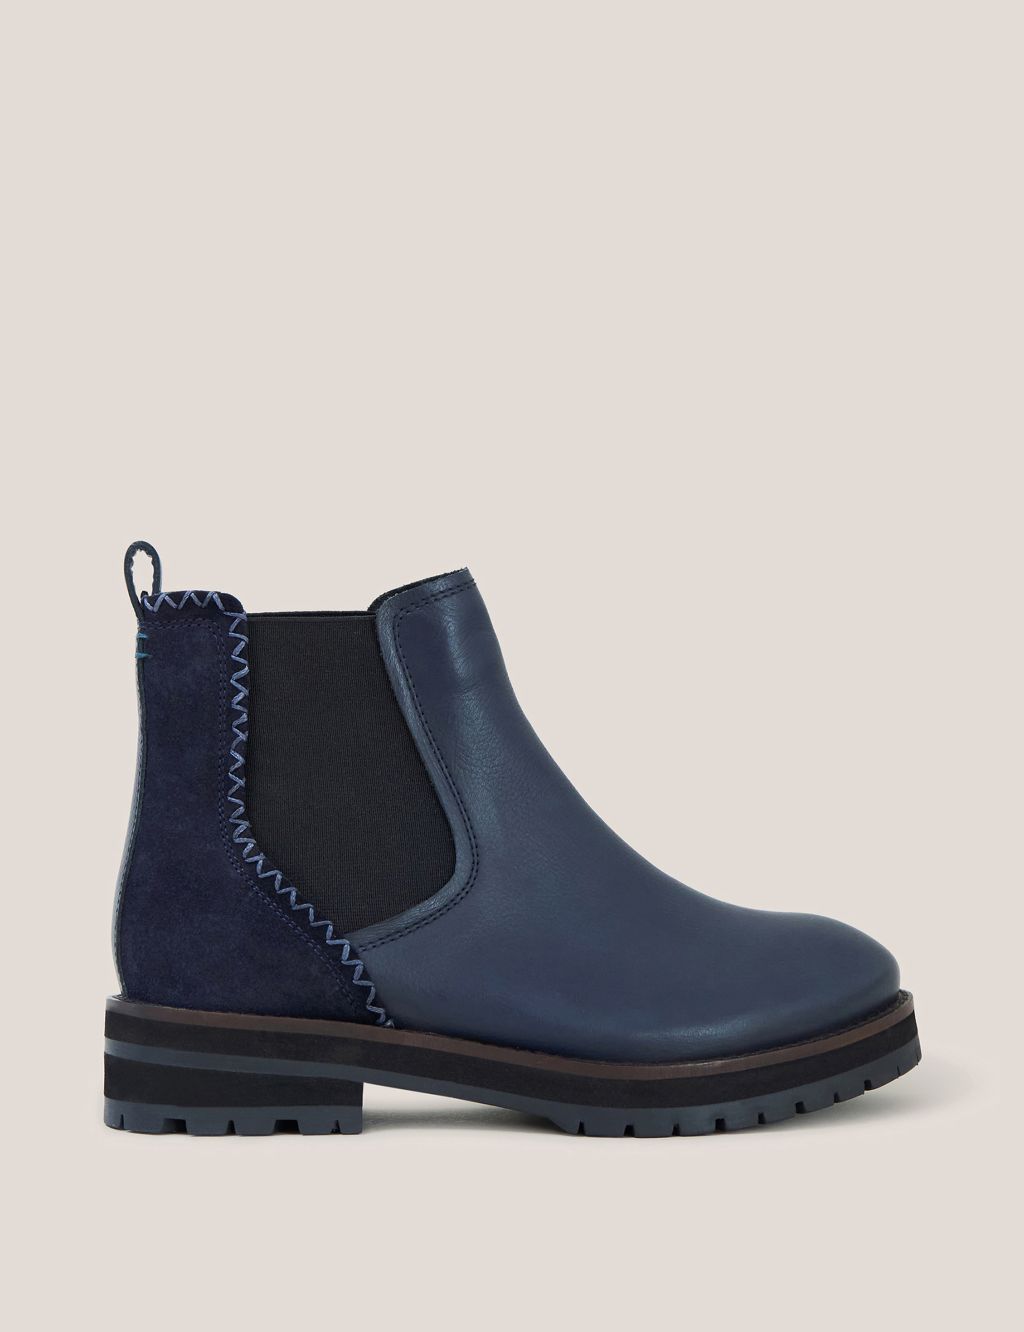 Leather Chelsea Ankle Boots image 1